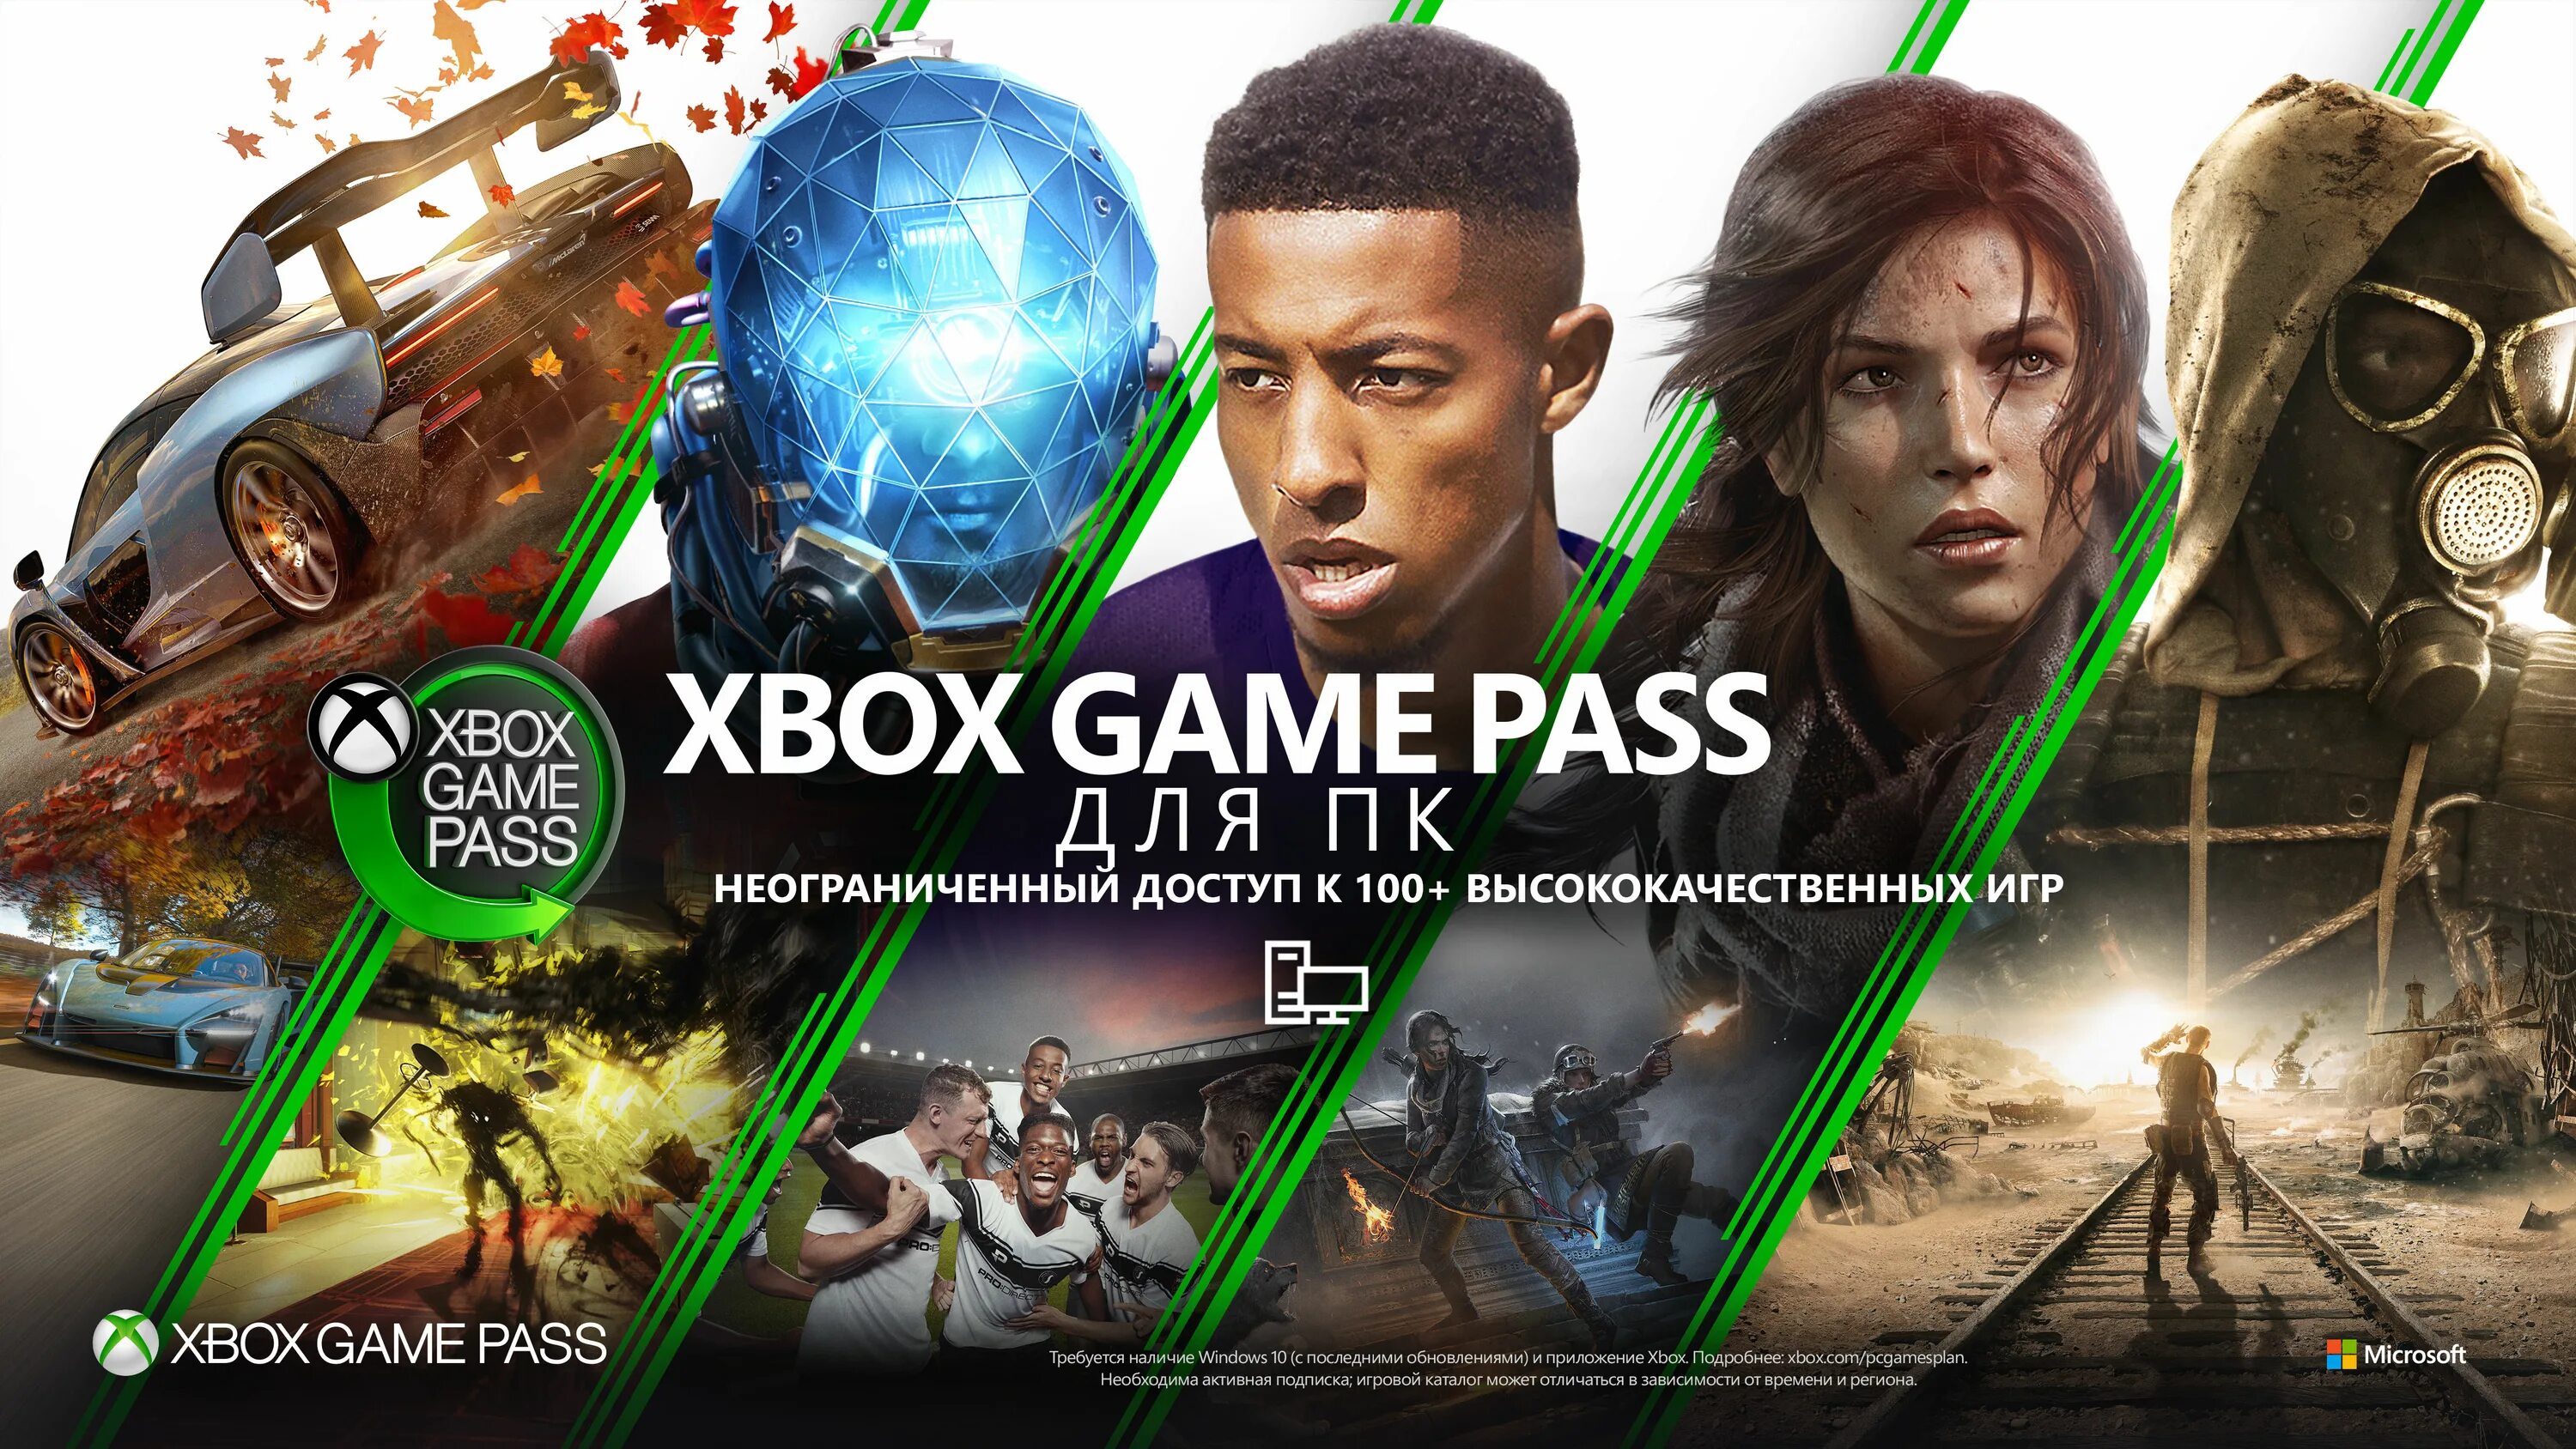 Game pass apk. Xbox game Pass Ultimate 2 месяца. Xbox game Pass 3 PC. Гаме пасс для иксбокс игры. Xbox game Pass Ultimate PC.